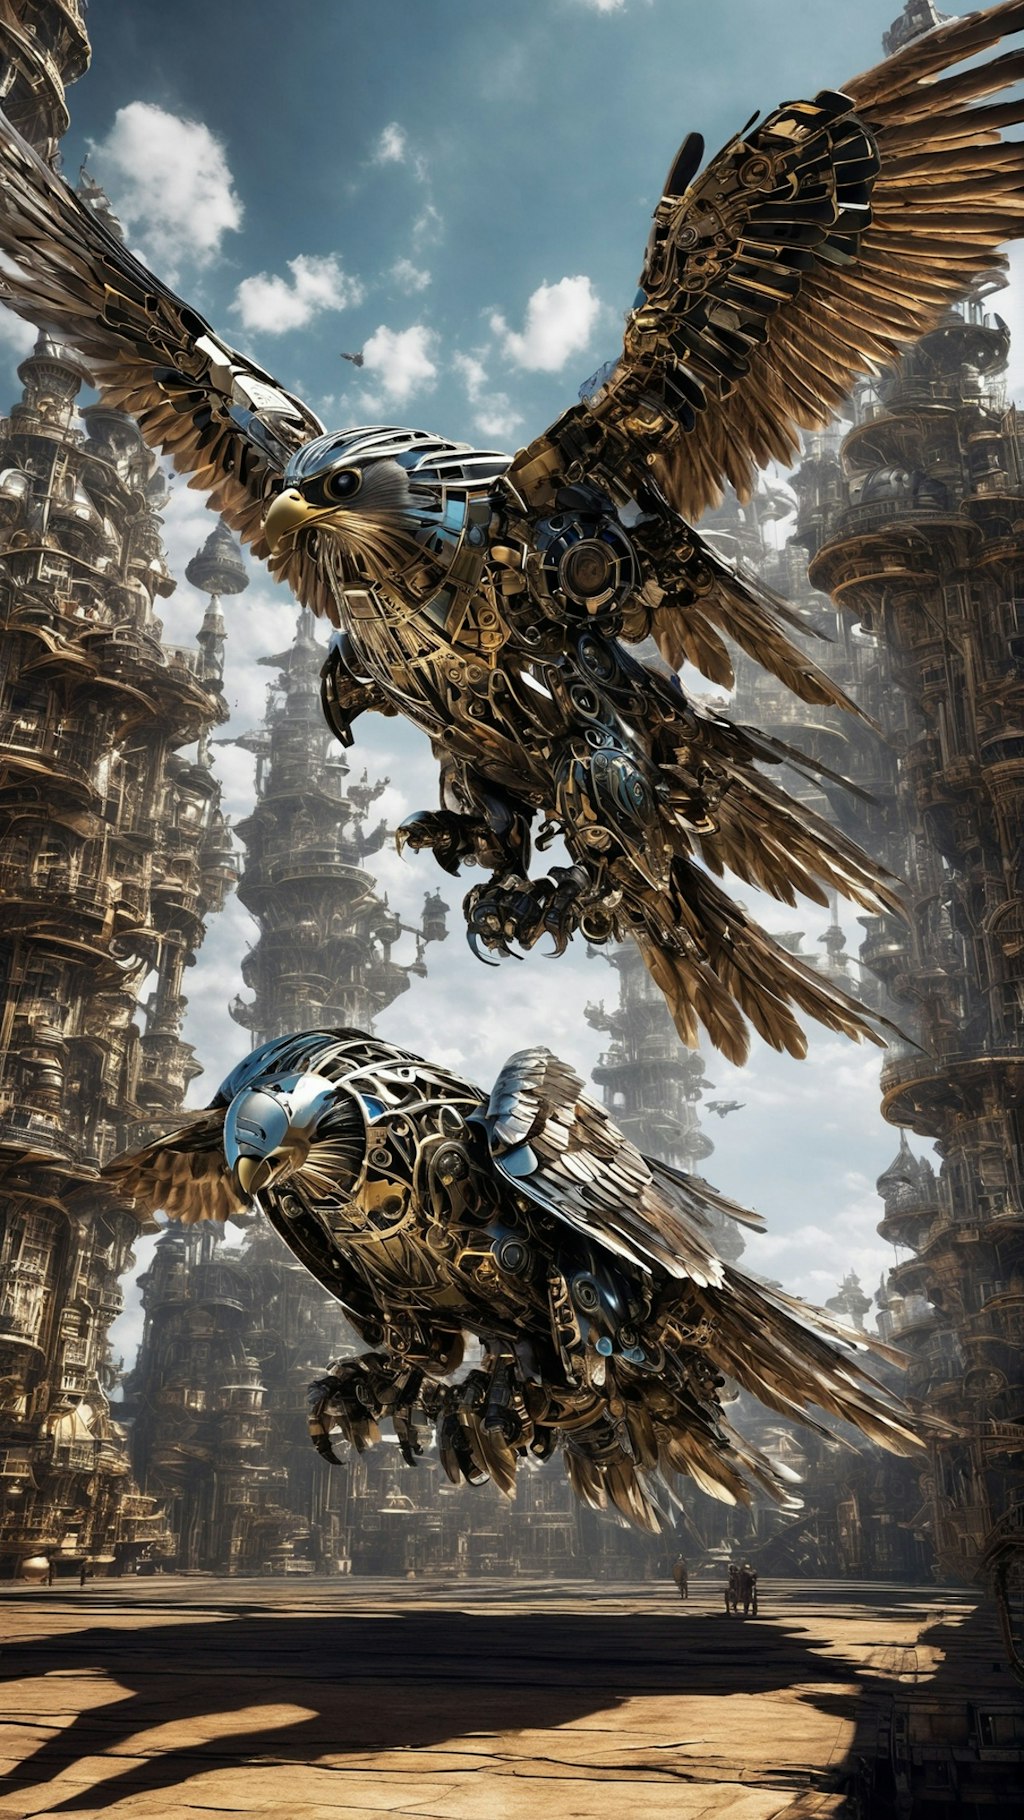 Mechanical Falcons: A Grand Journey Beyond Reality